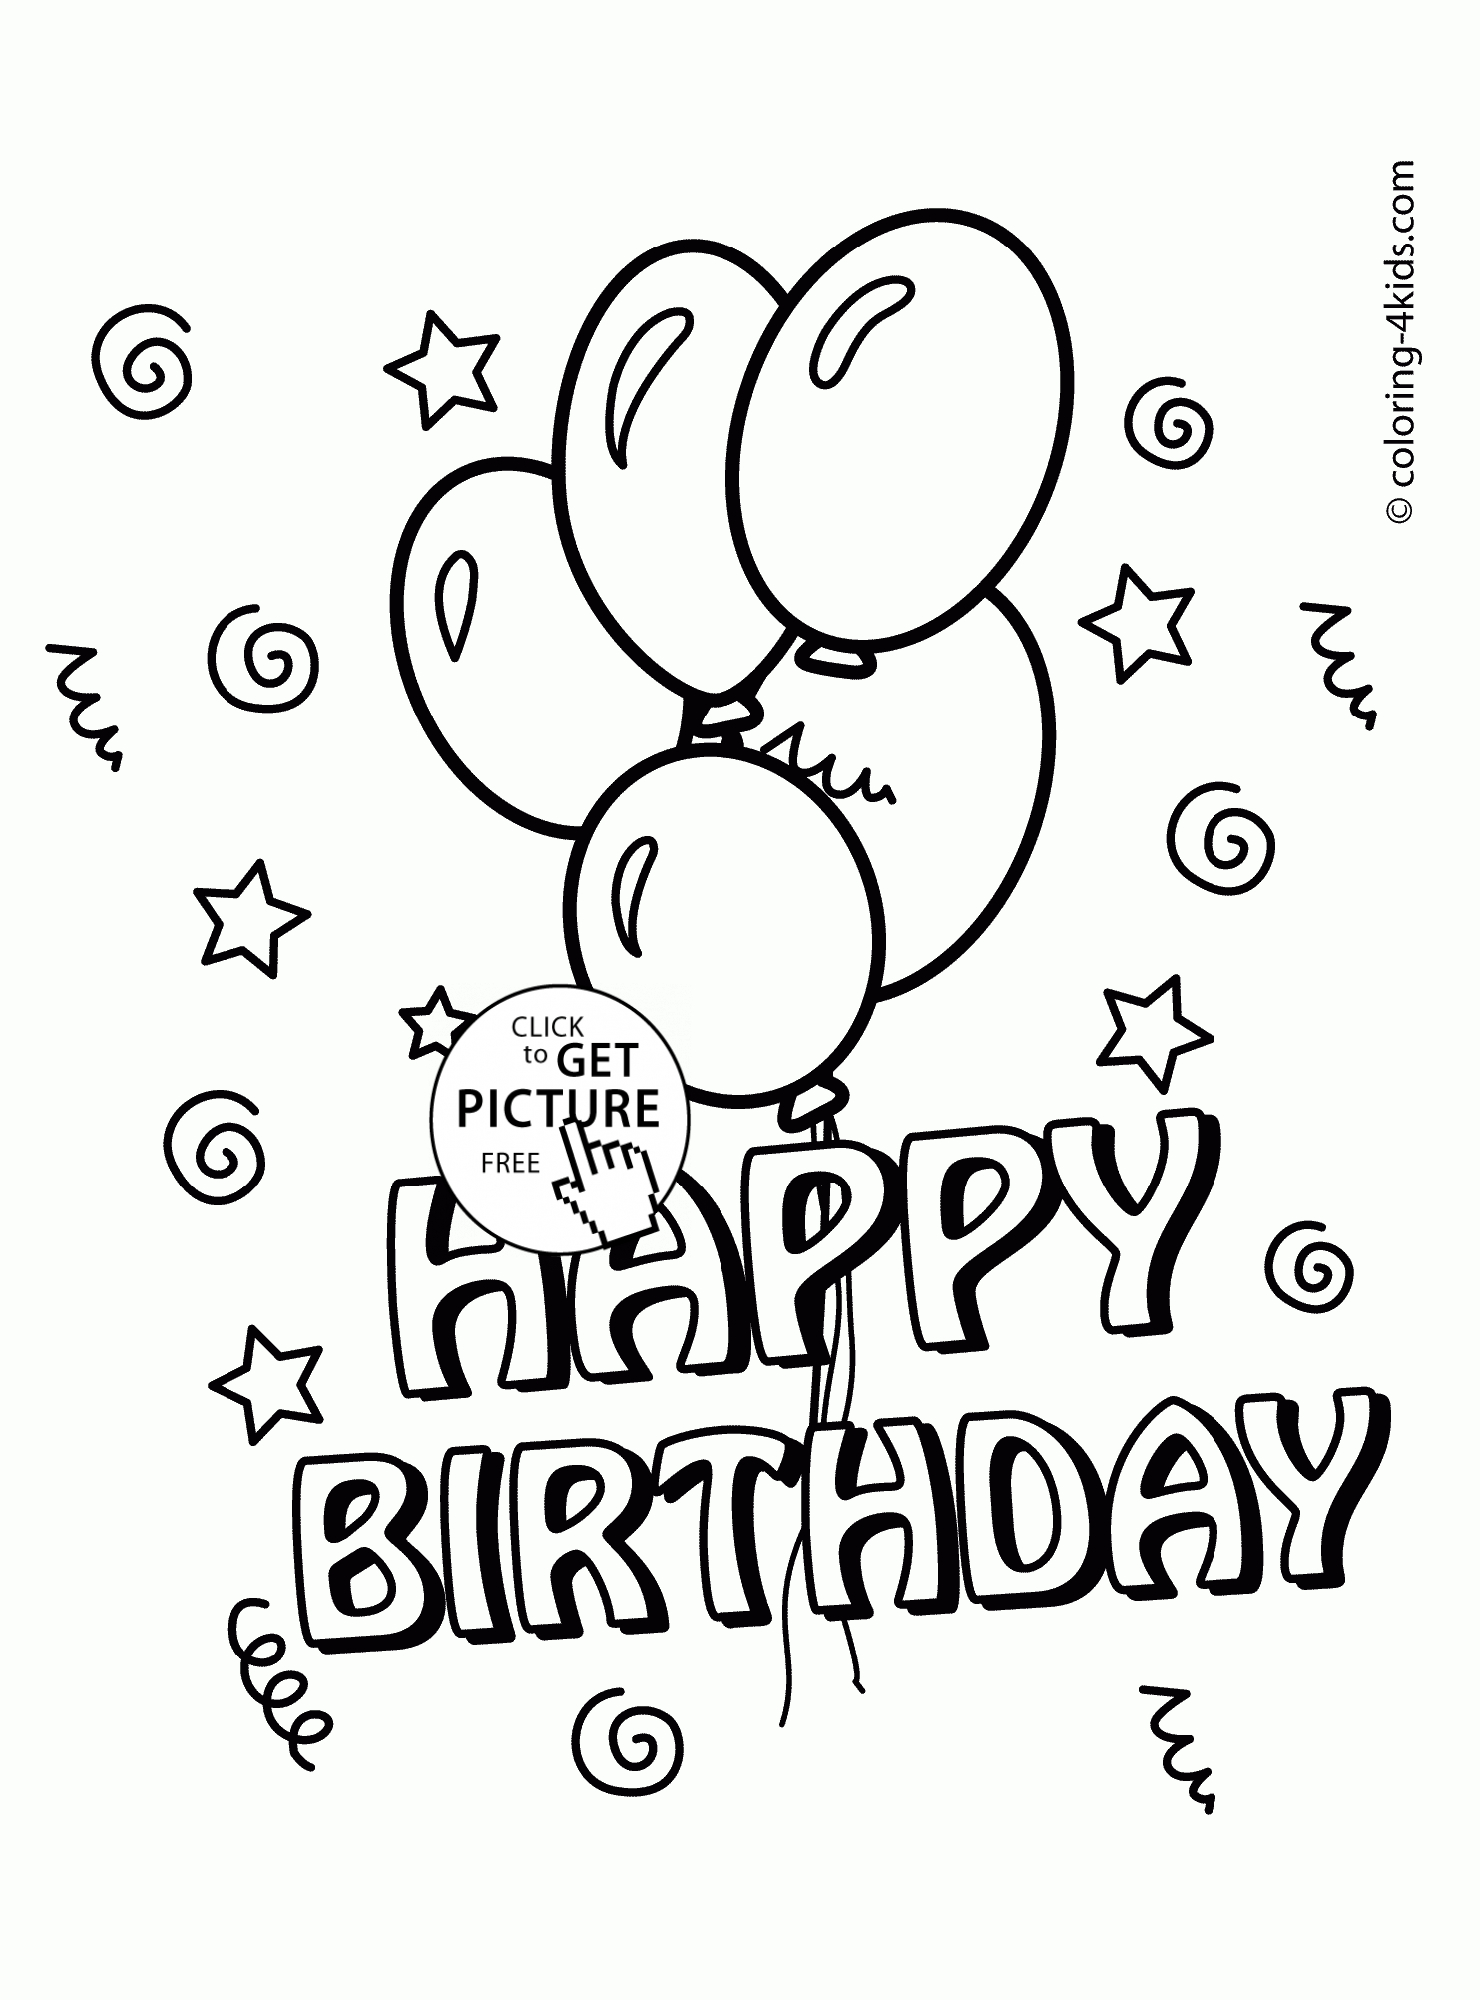 Happy Birthday Dad Card Ideas Happy Birthday Dad Drawing At Getdrawings Free For Personal